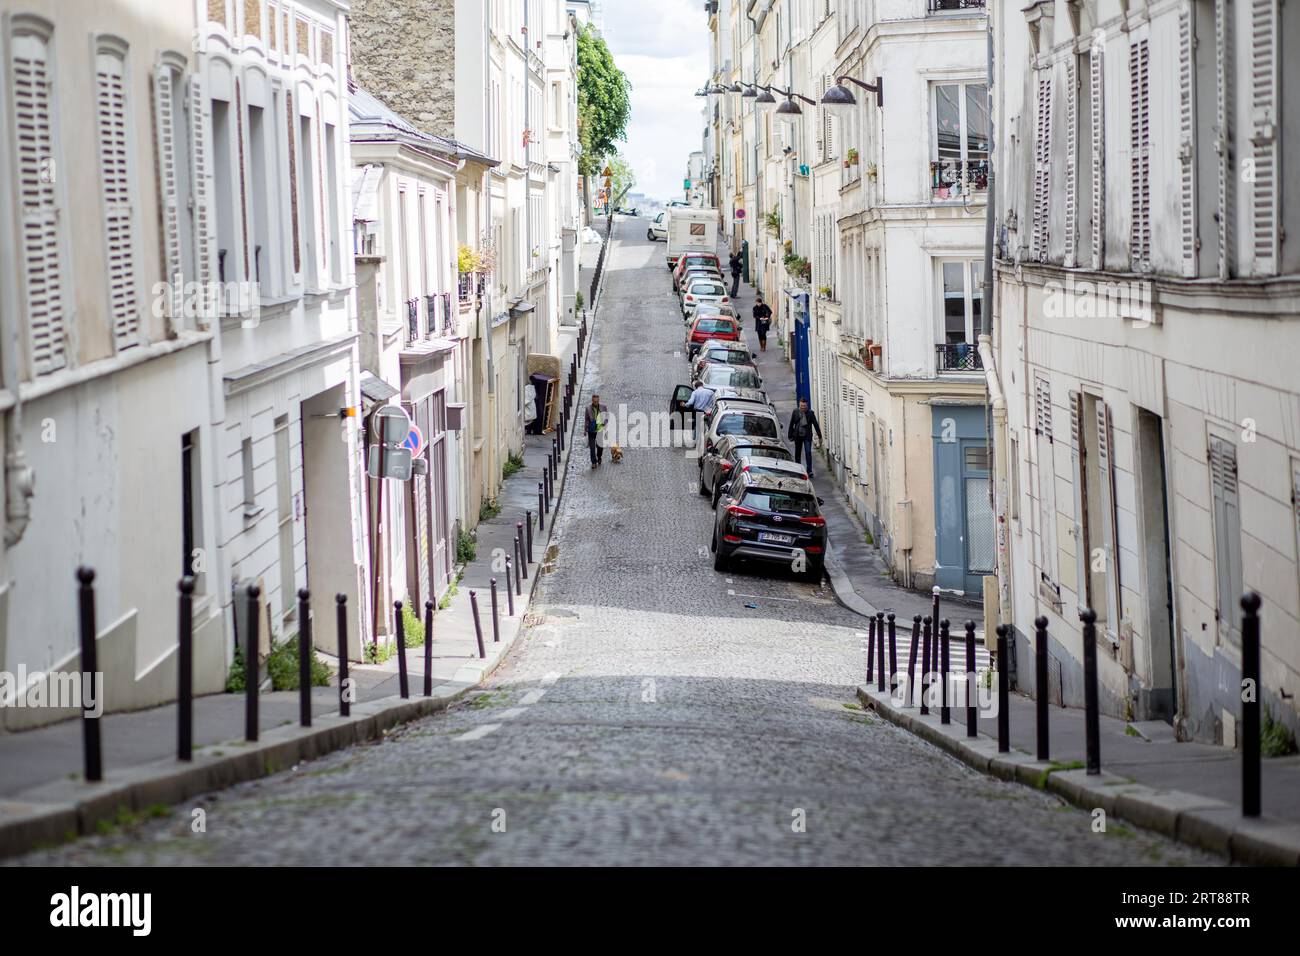 Paris, France, May 12, 2017: People in a street in Montmartre district Stock Photo